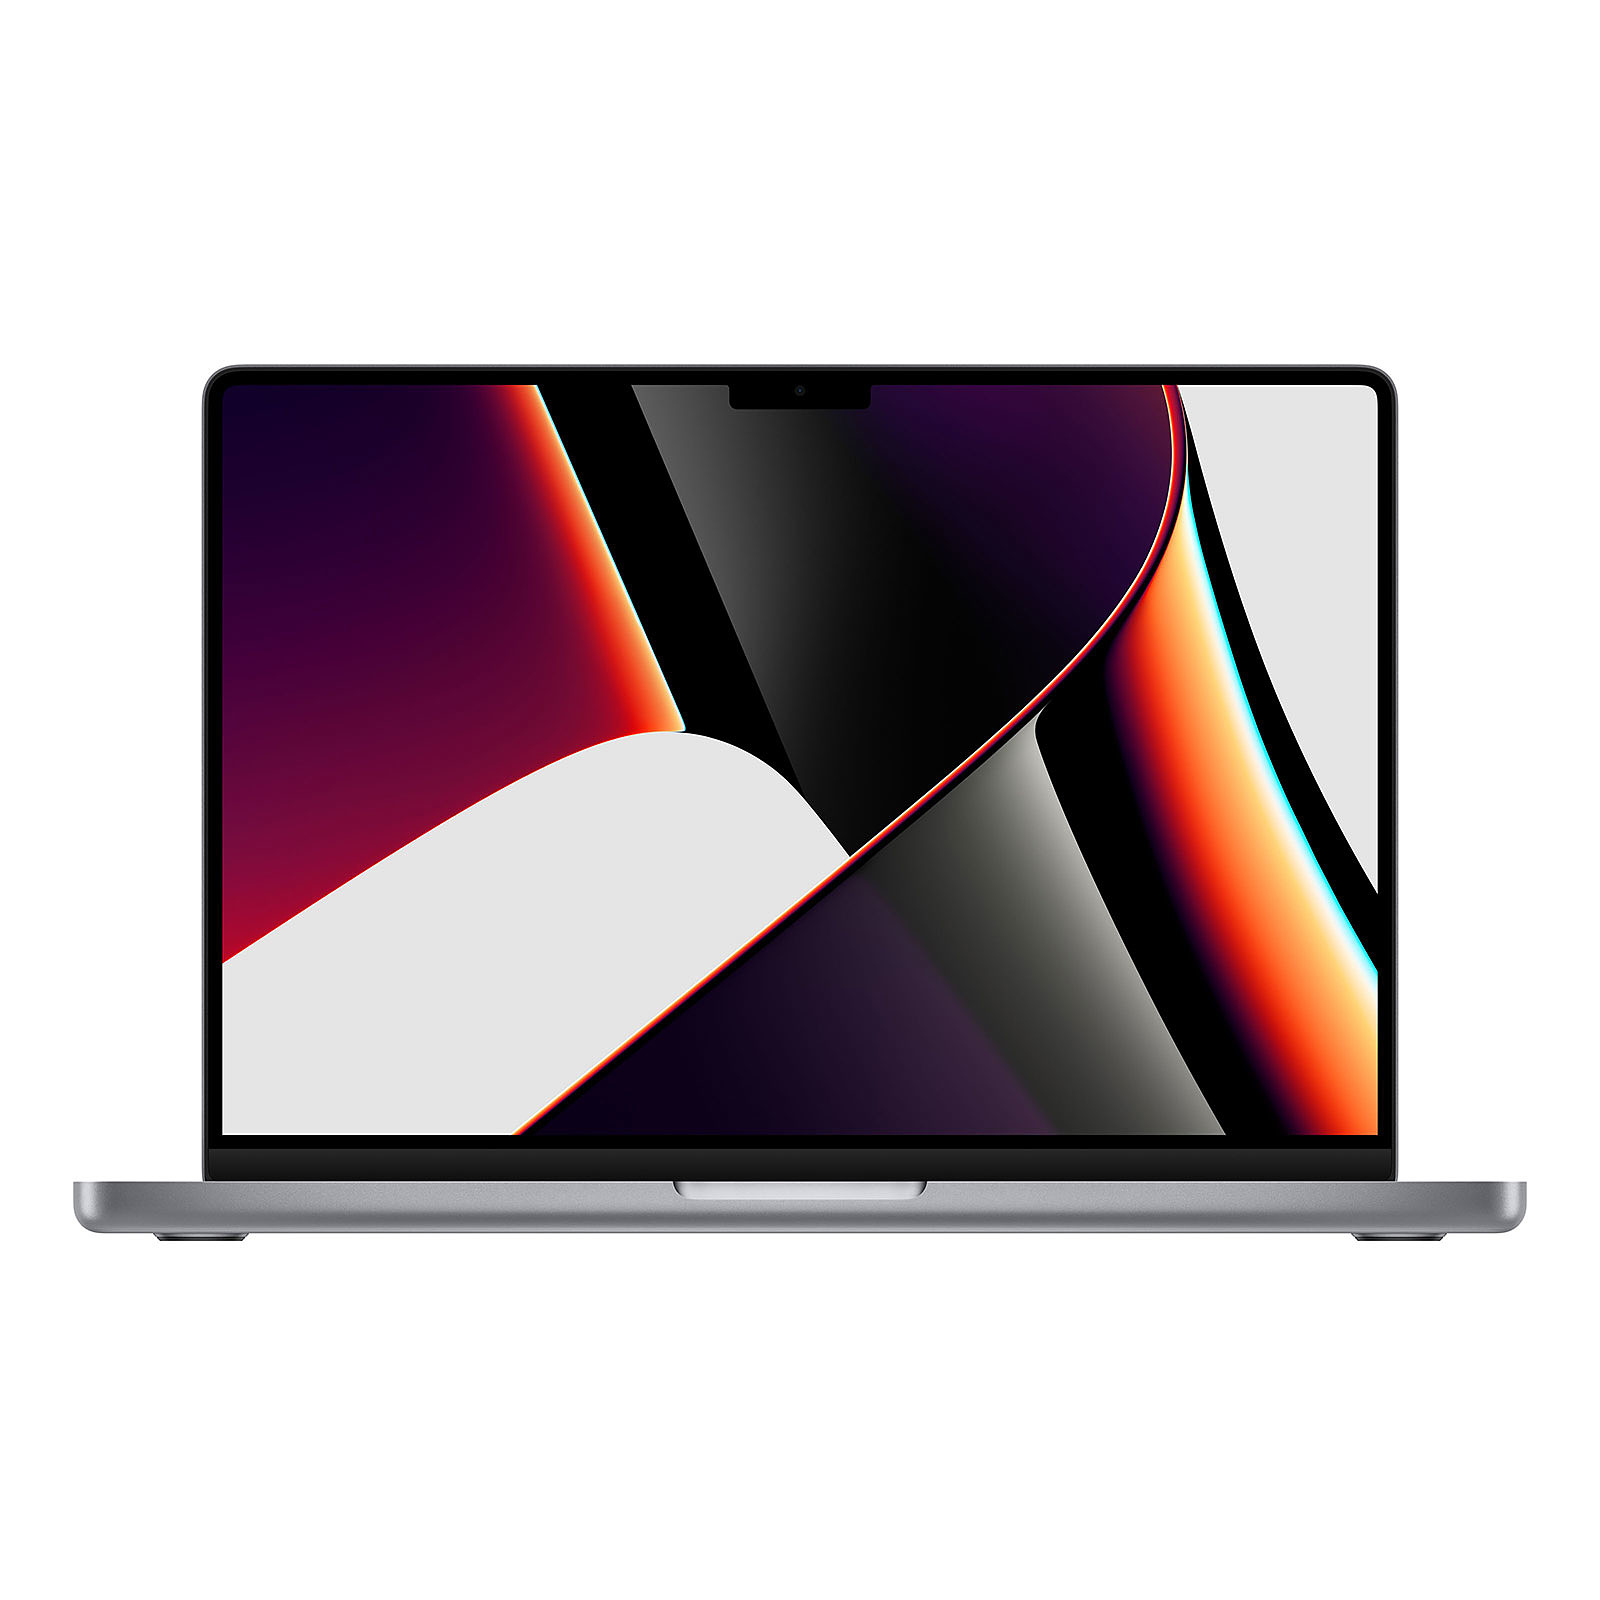 Apple MacBook Pro M1 Pro (2021) 14" Gris sideral 32Go/1To (MKGQ3FN/A-M1-MAX-32GB) - MacBook Apple